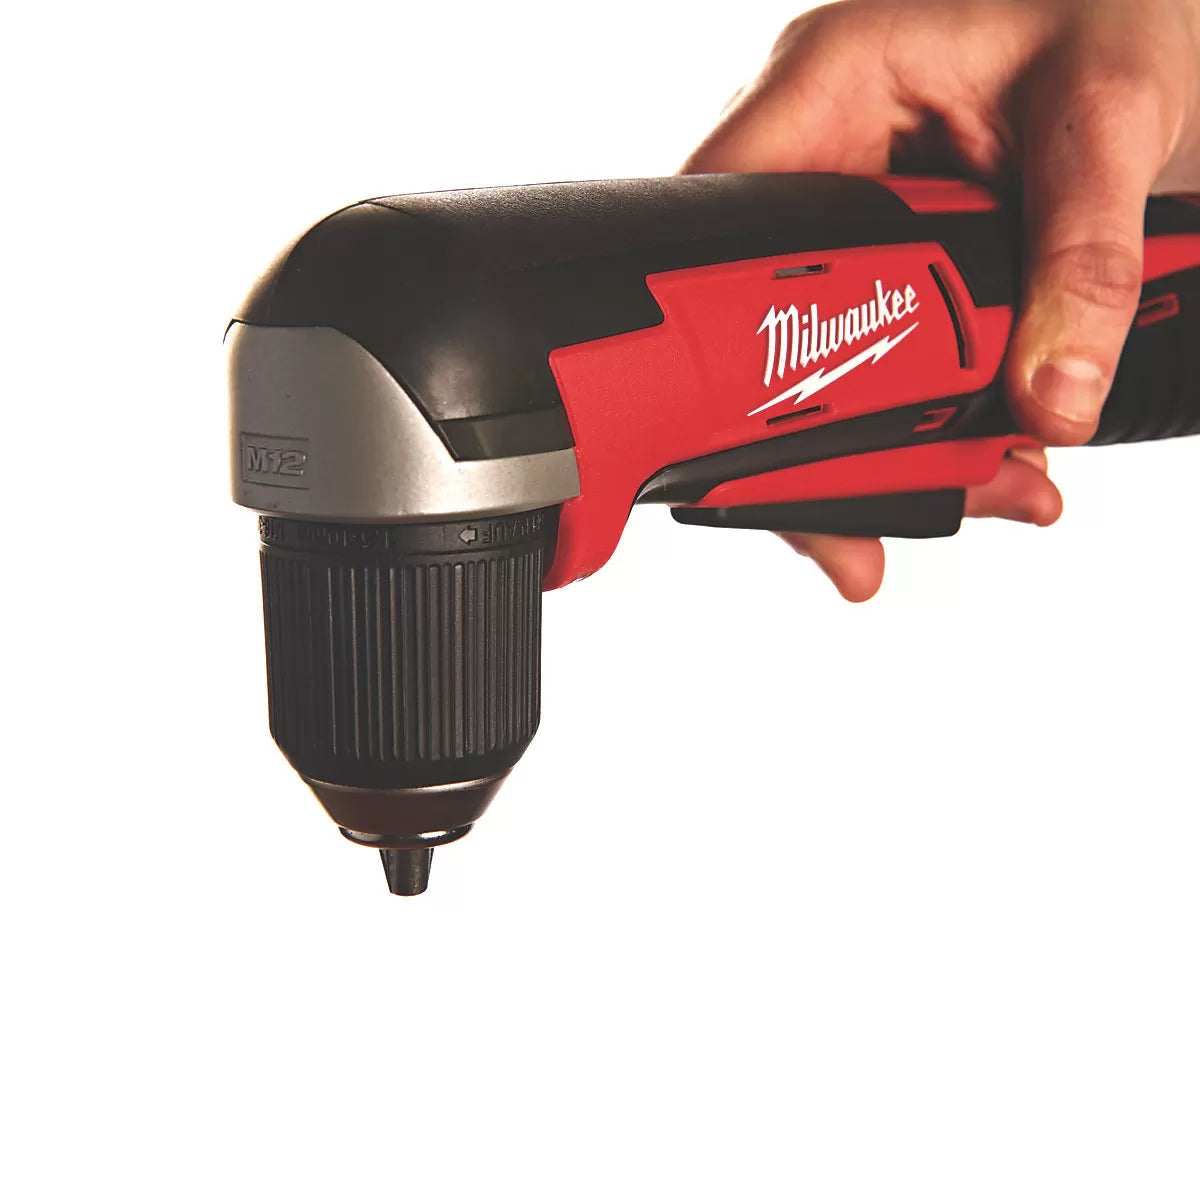 Milwaukee C12RAD-0 12V Angle Drill with 1 x 2.0Ah Battery & Charger